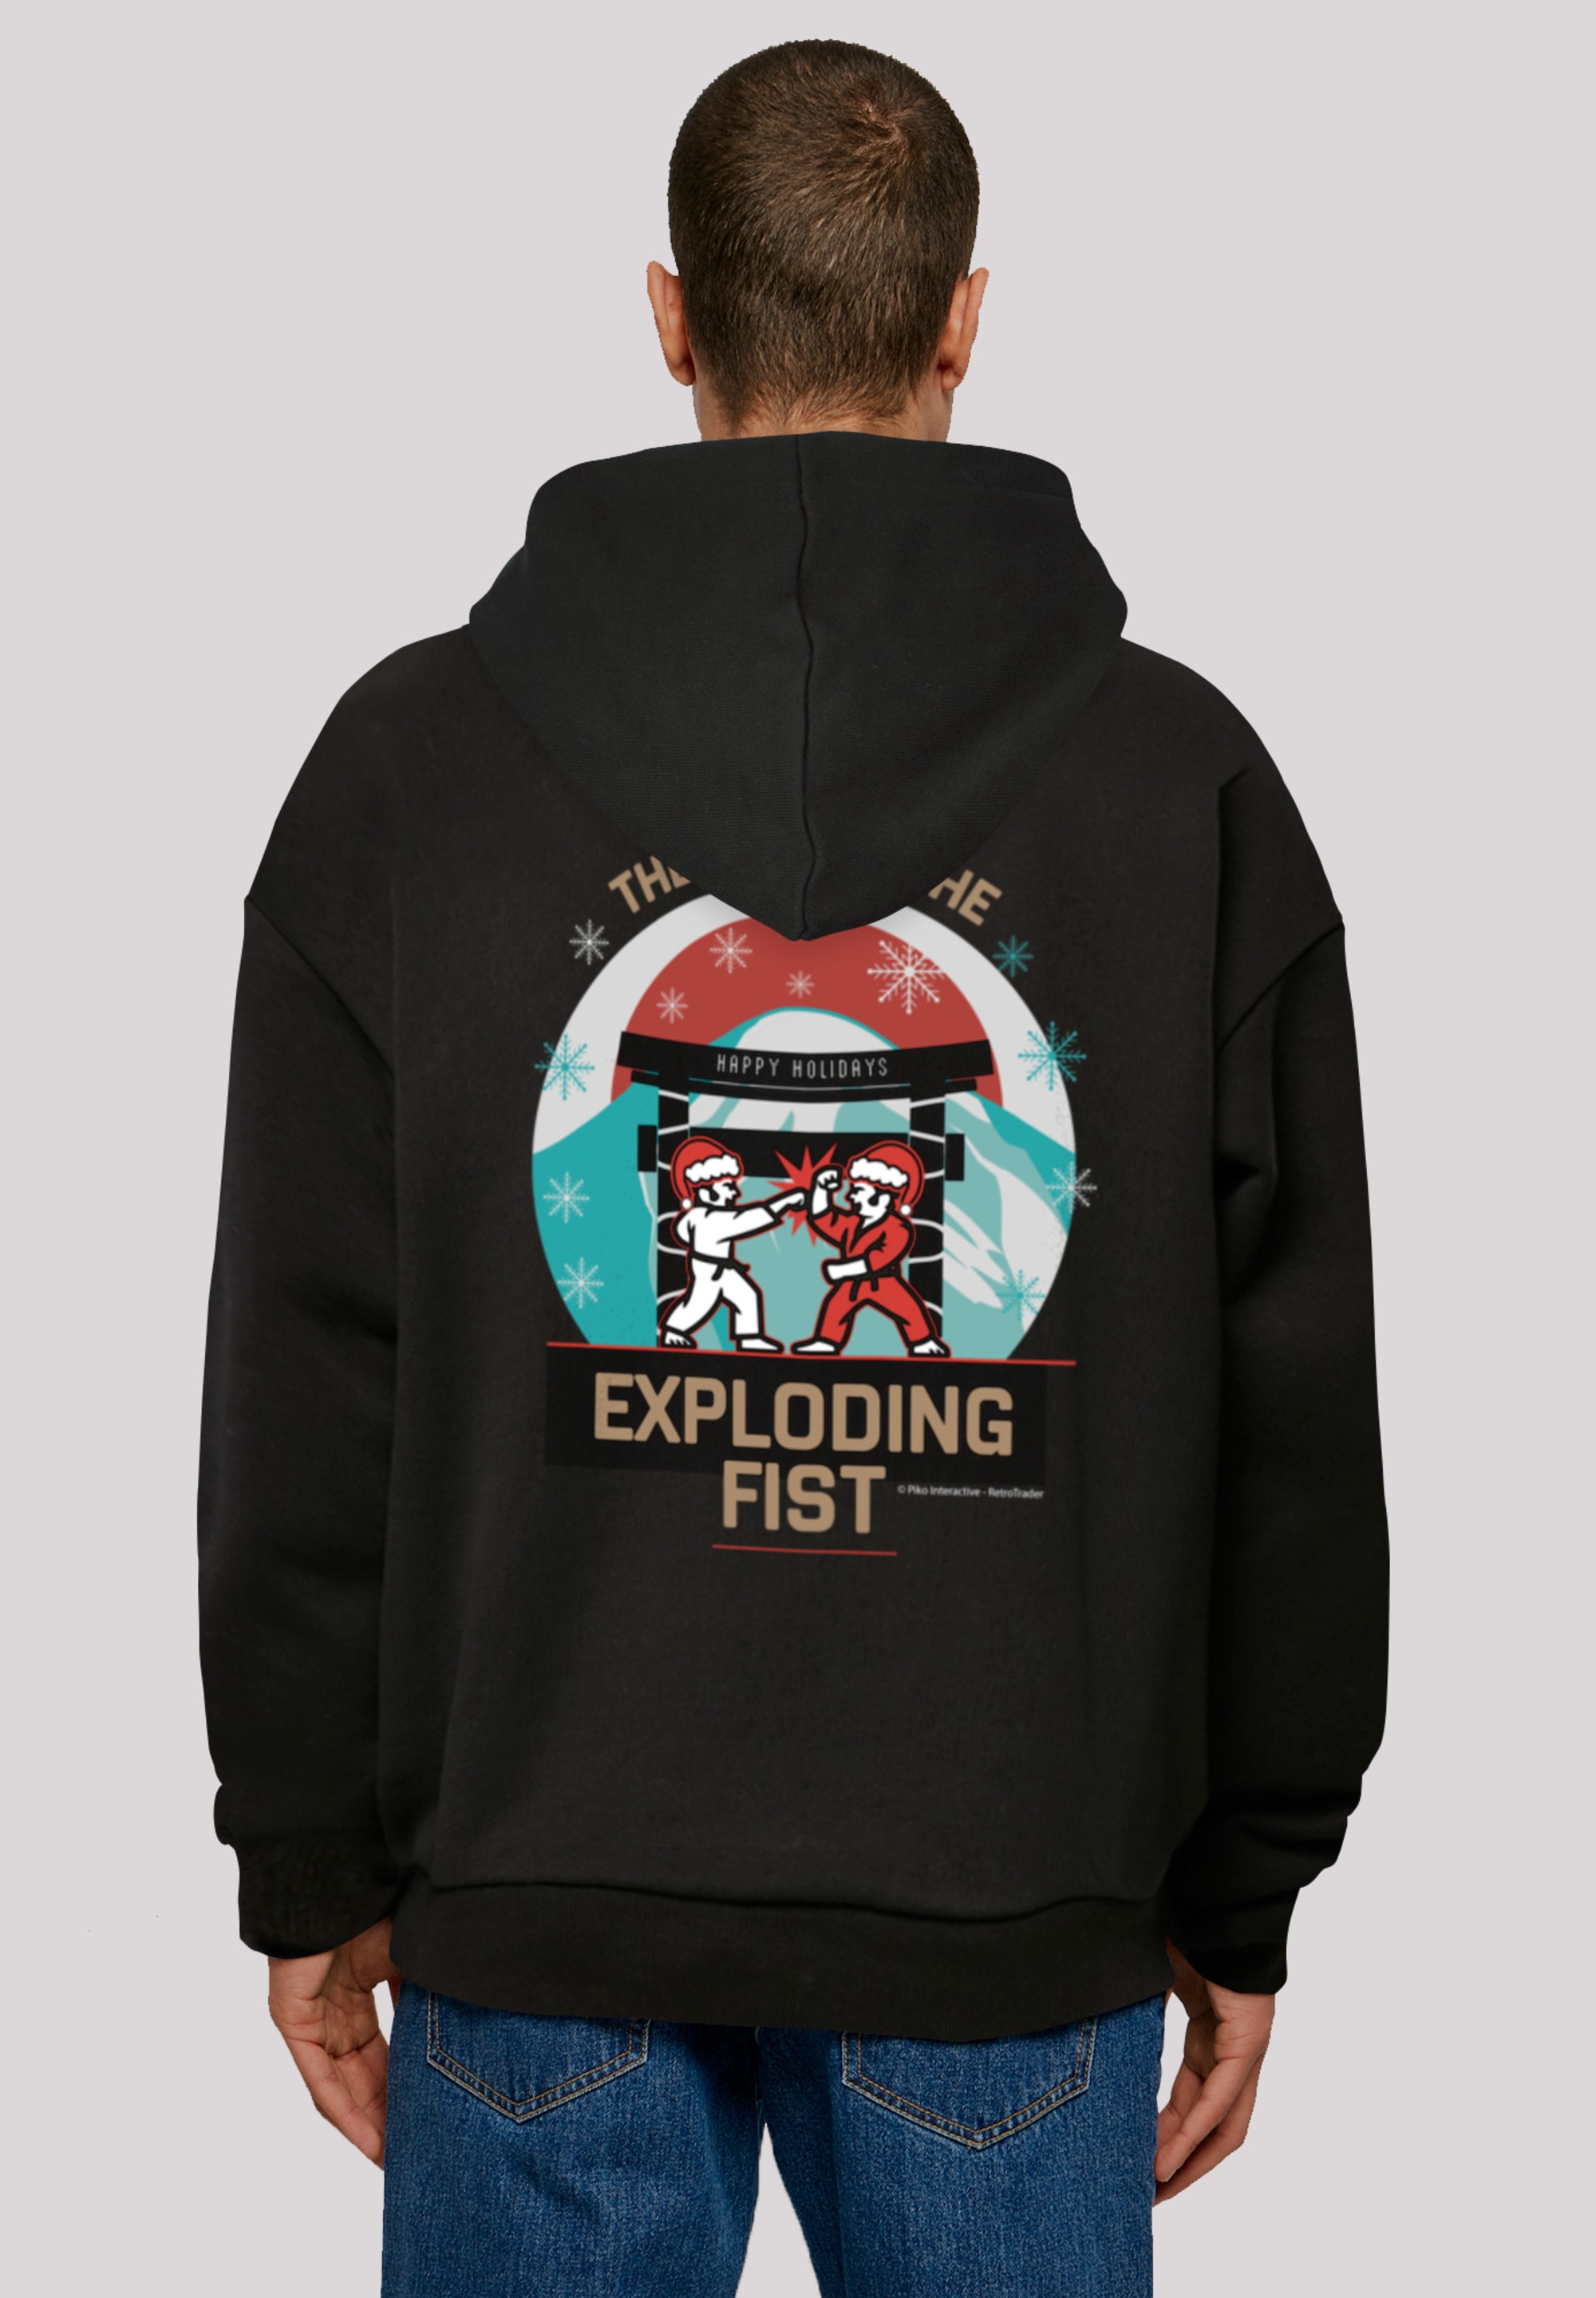 F4NT4STIC Kapuzenpullover »Christmas Way of the Exploding Fist«, Print